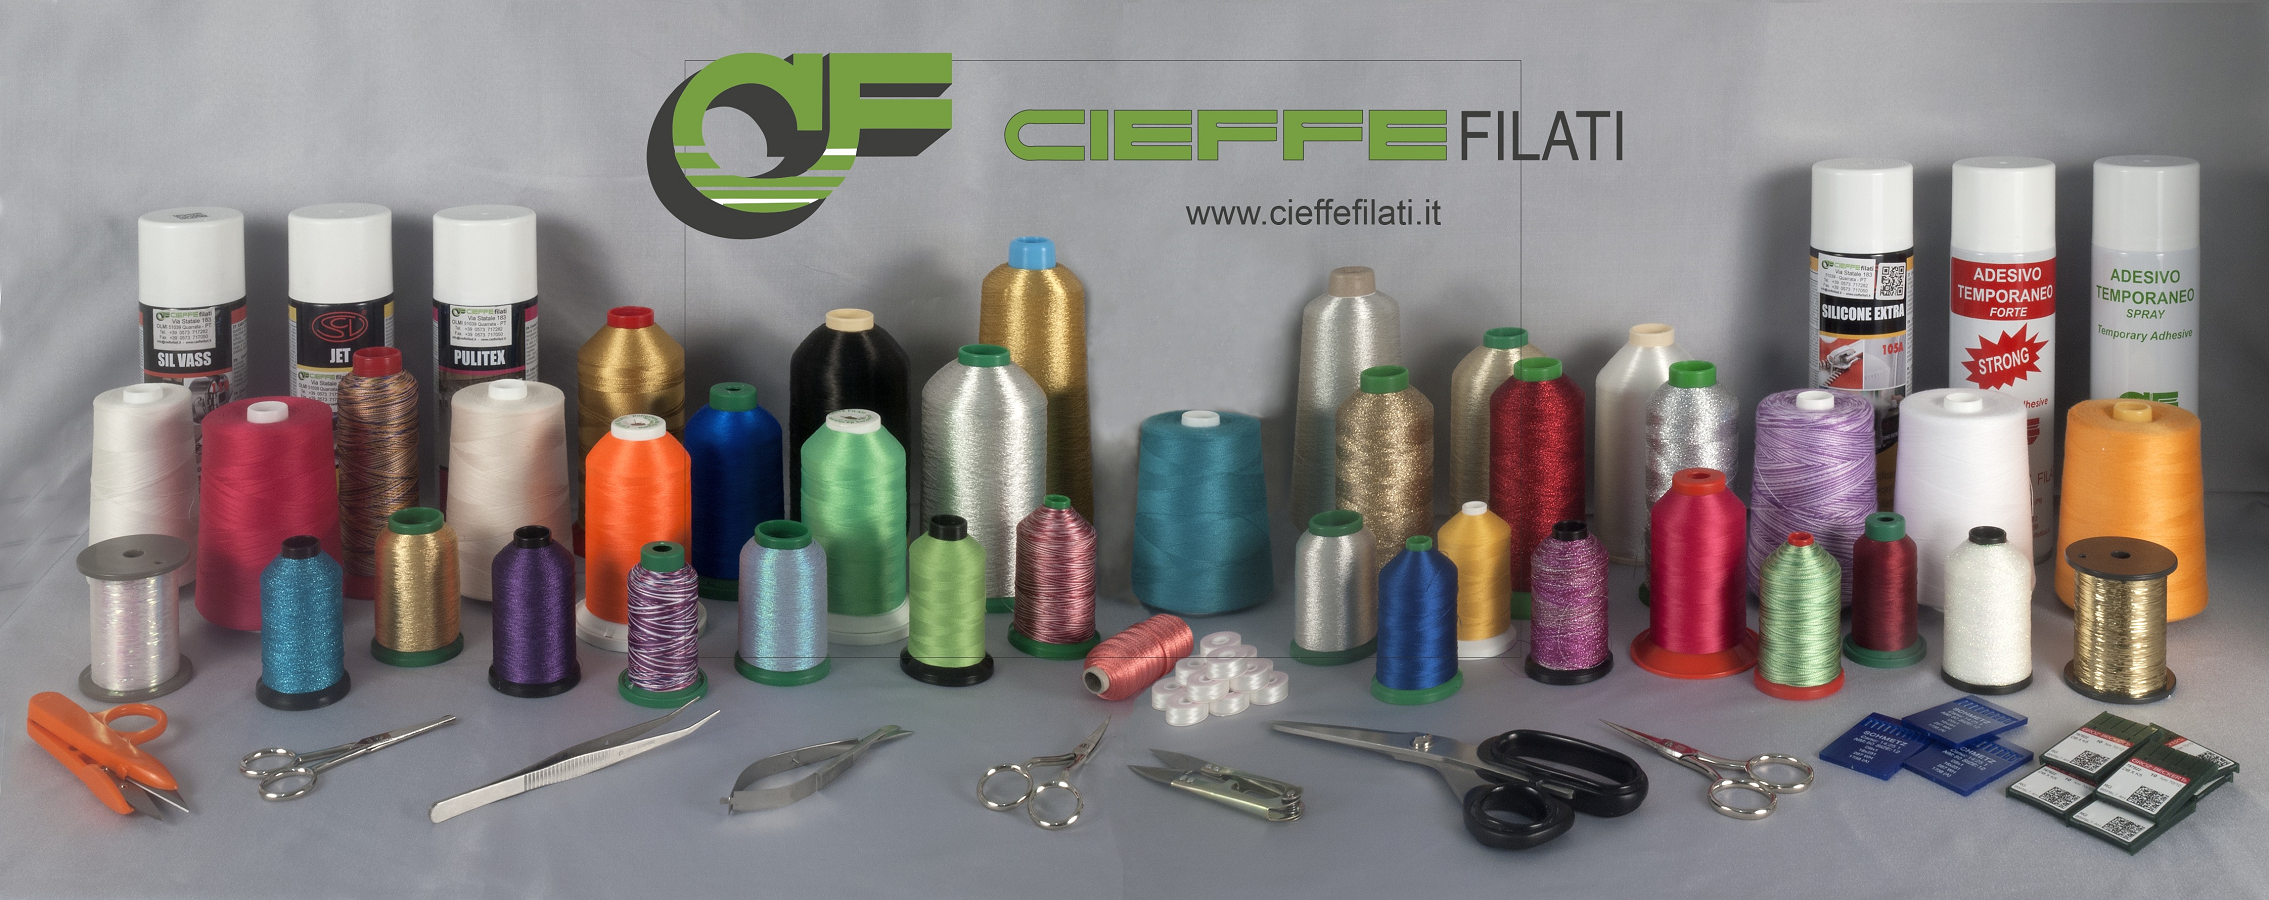 <h3>Some products and accessories by Cieffe Filati</h3>
